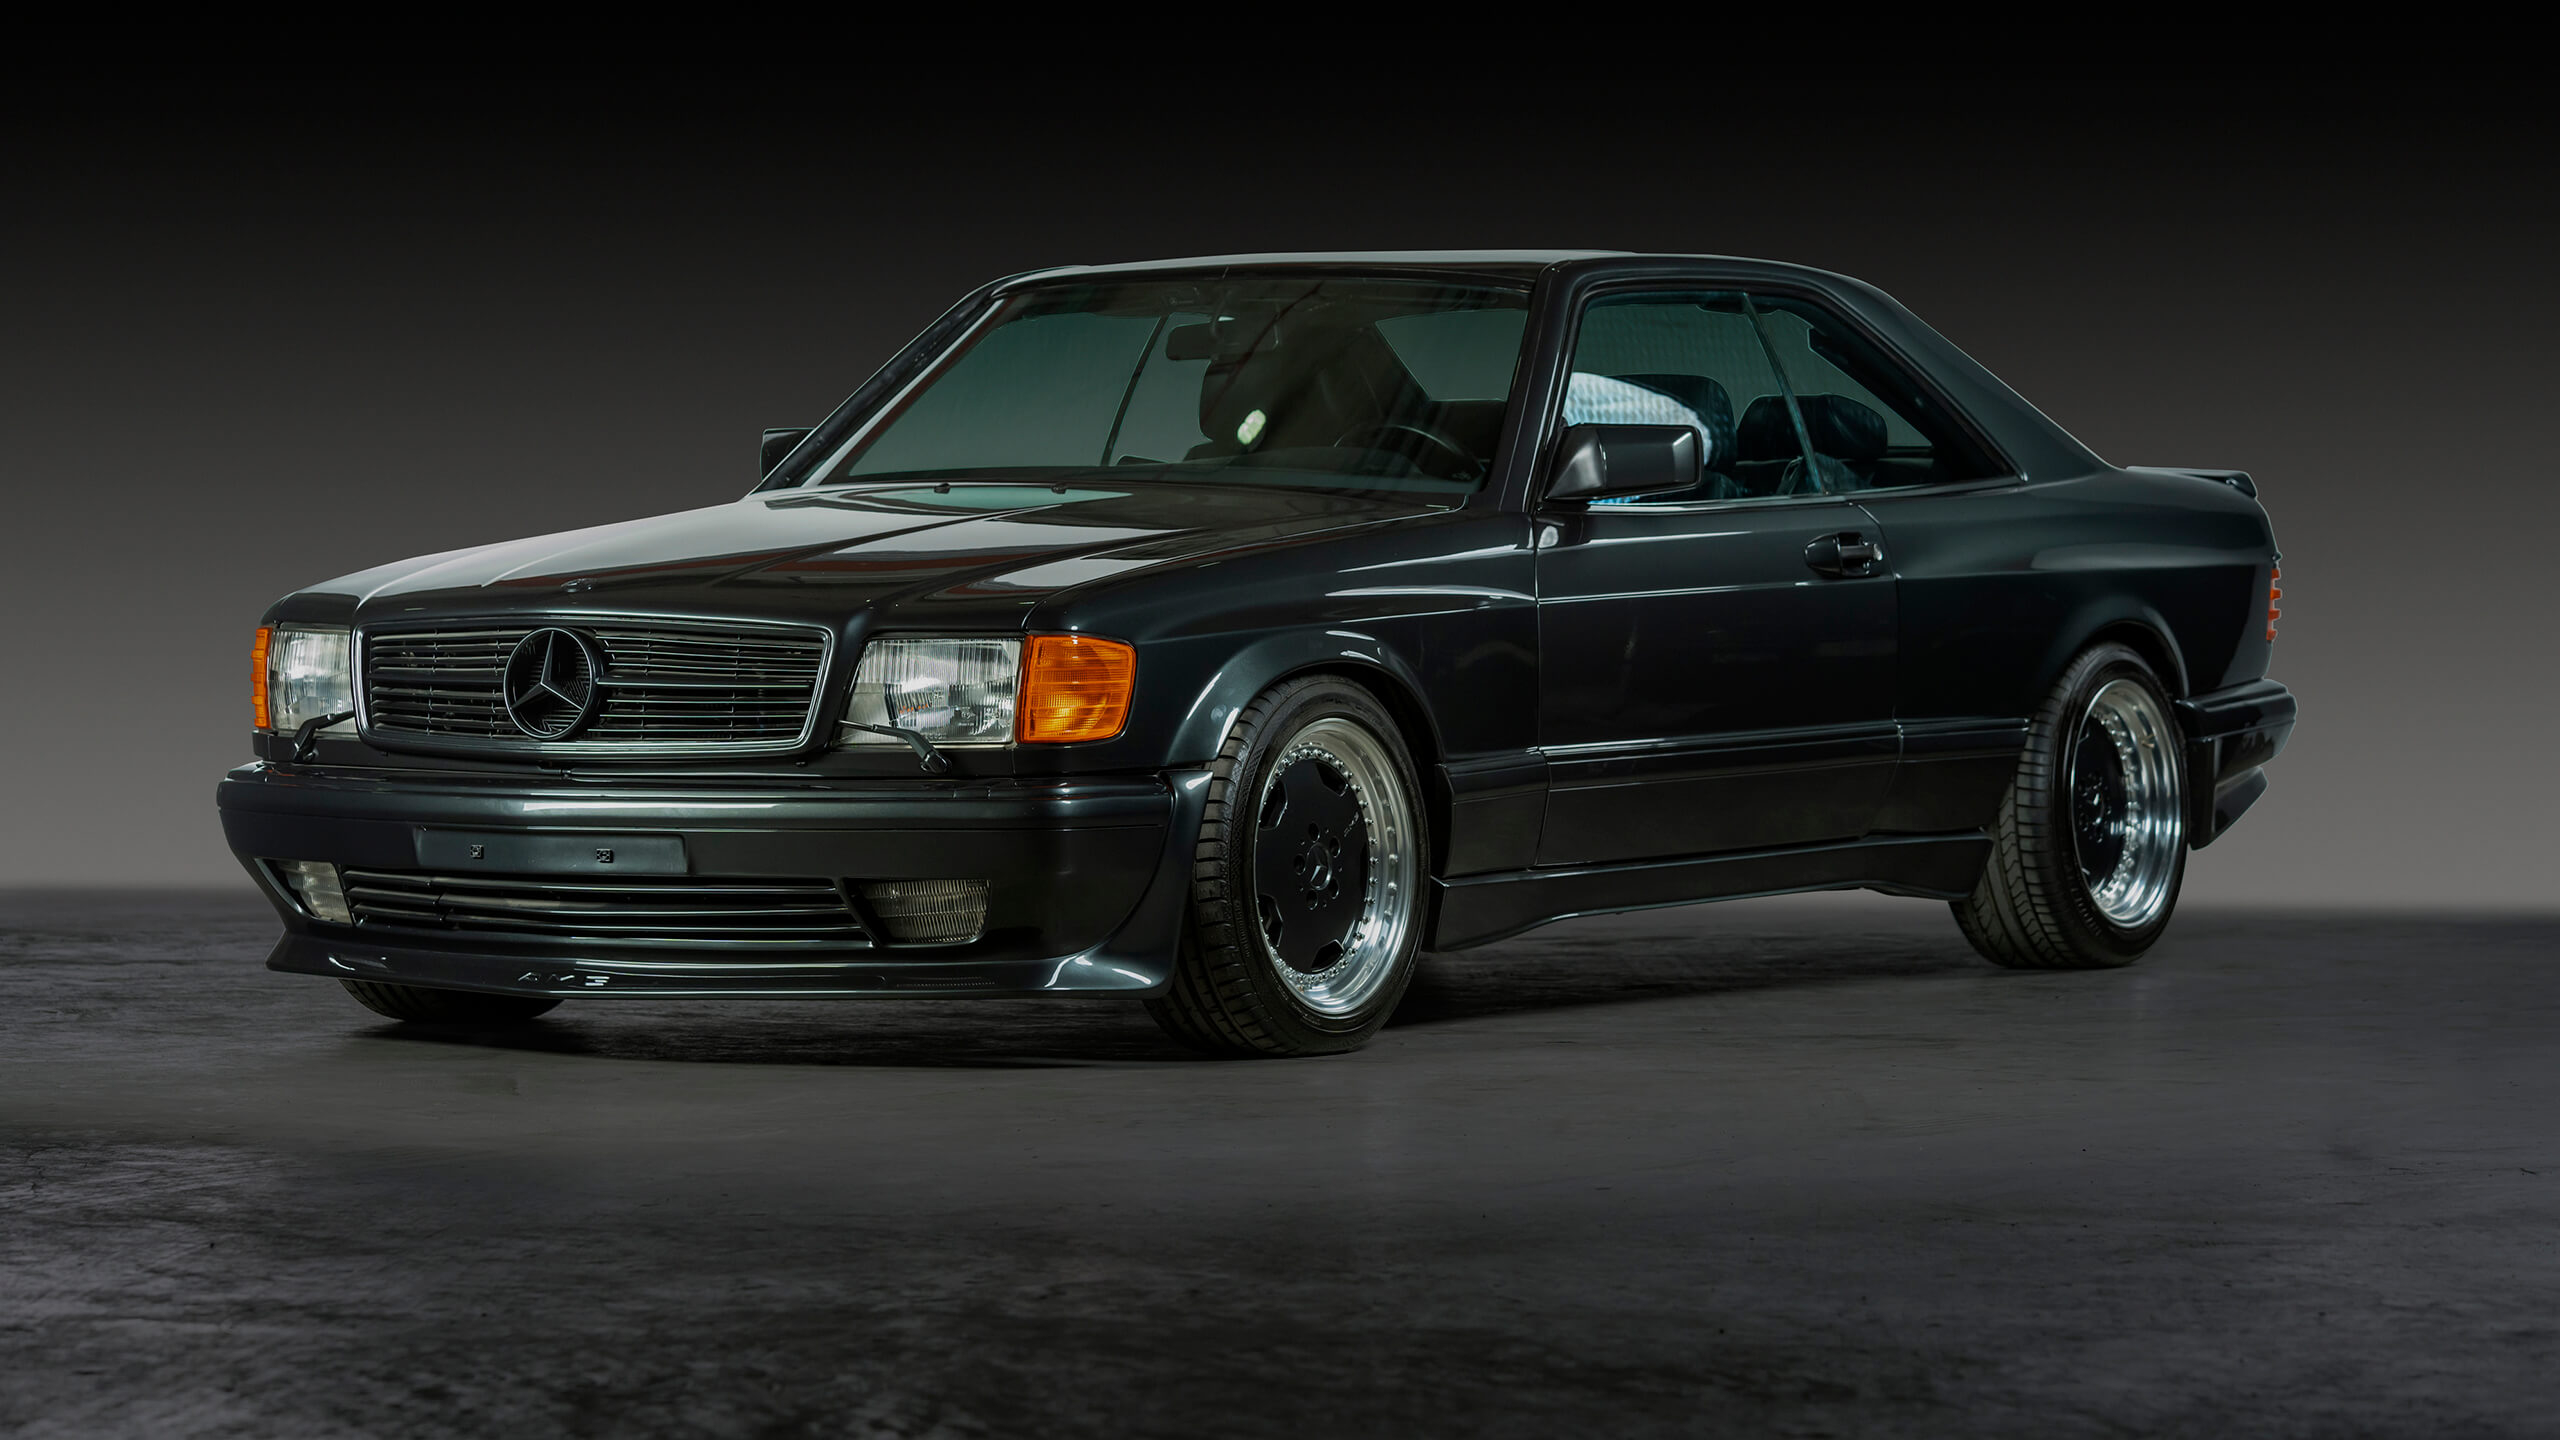 Miami Price: RM sells Mercedes 560 SEC AMG 6.0 'Wide-Body' for $720k